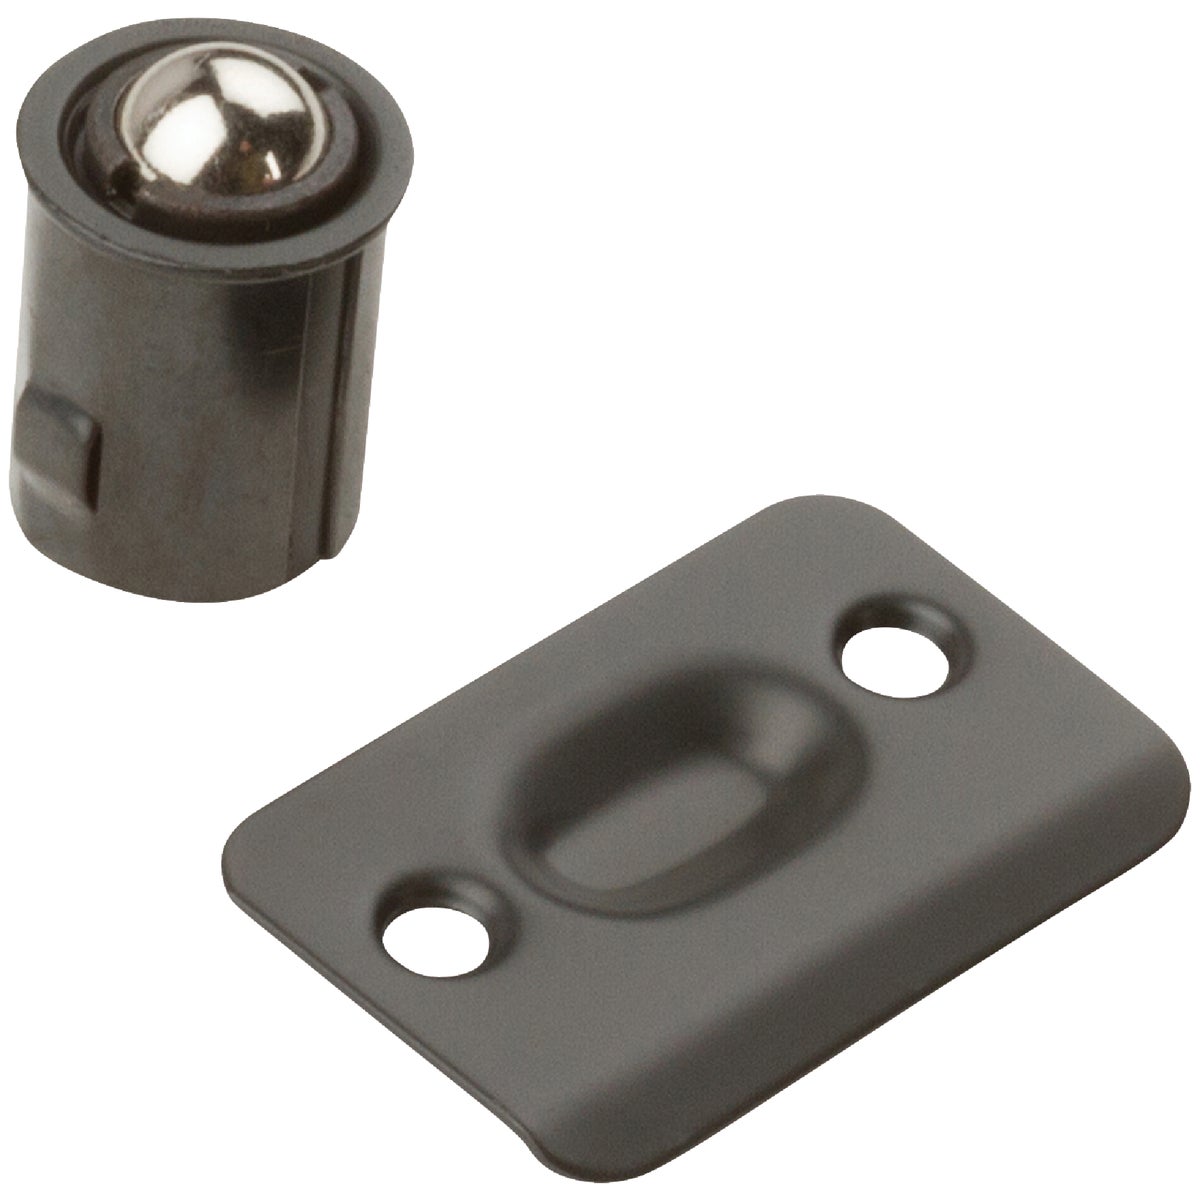 National 1440Oil Rubbed Bronze Drive-In Ball Catch